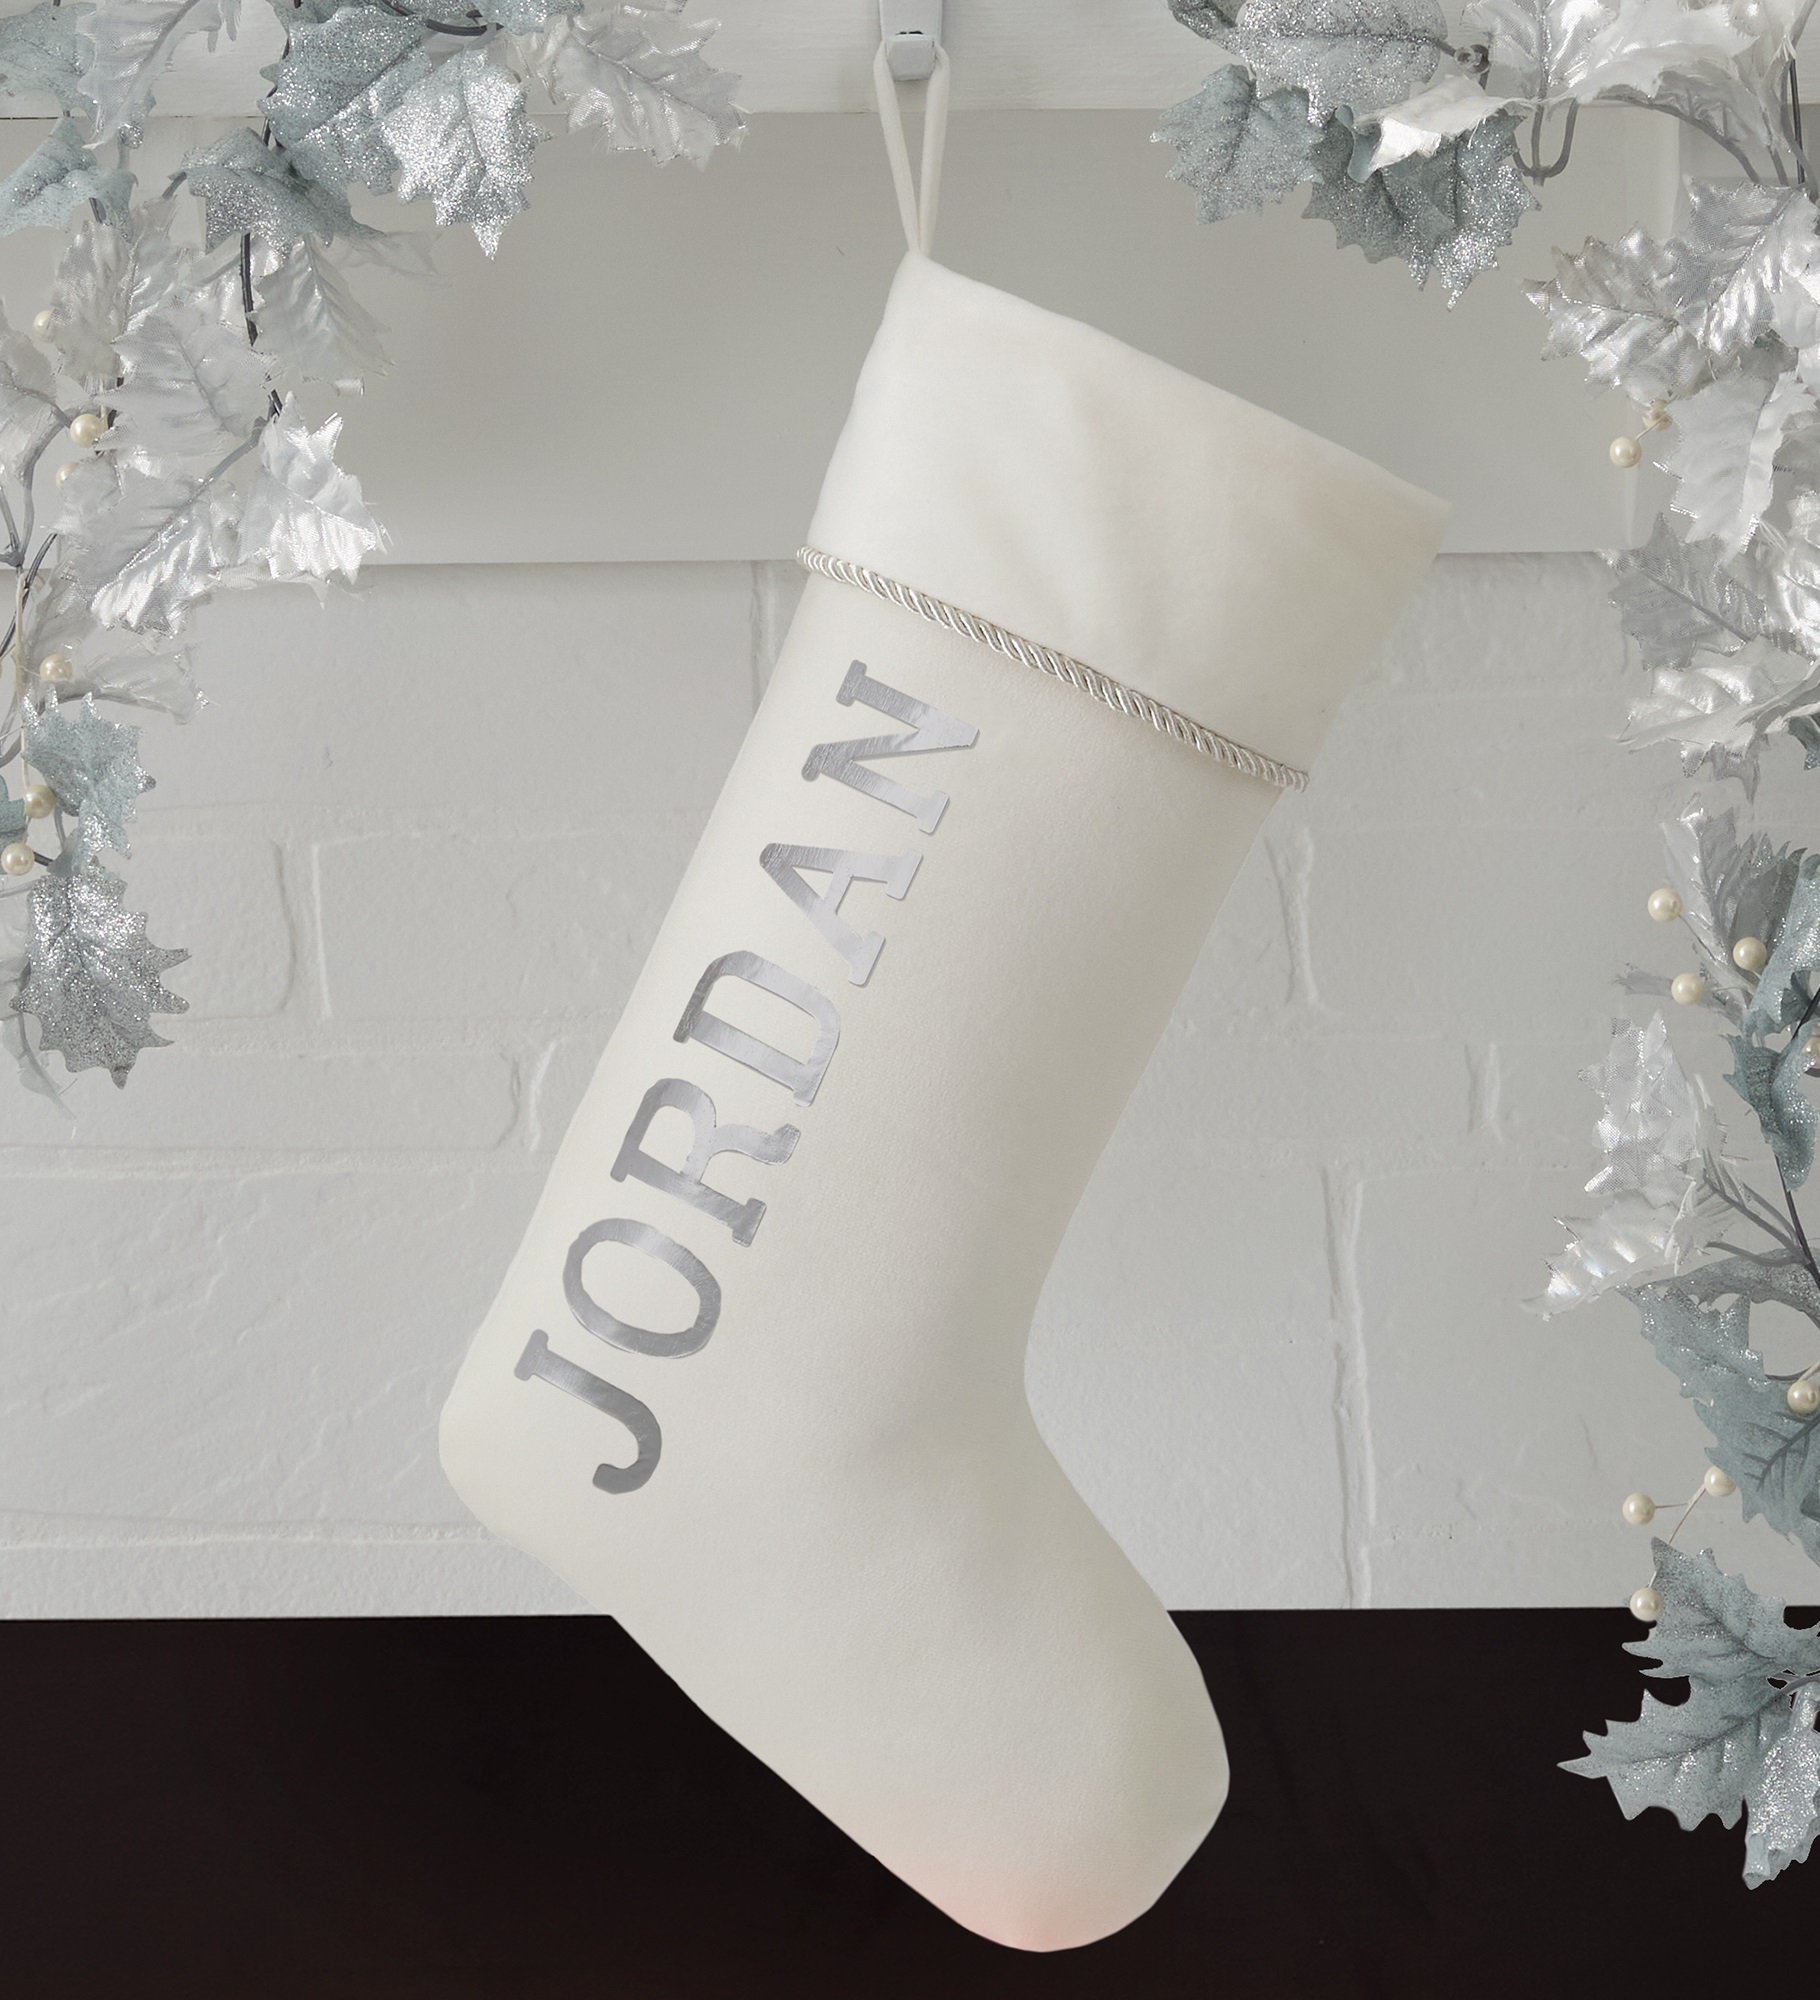 Glistening Name Personalized Christmas Stockings